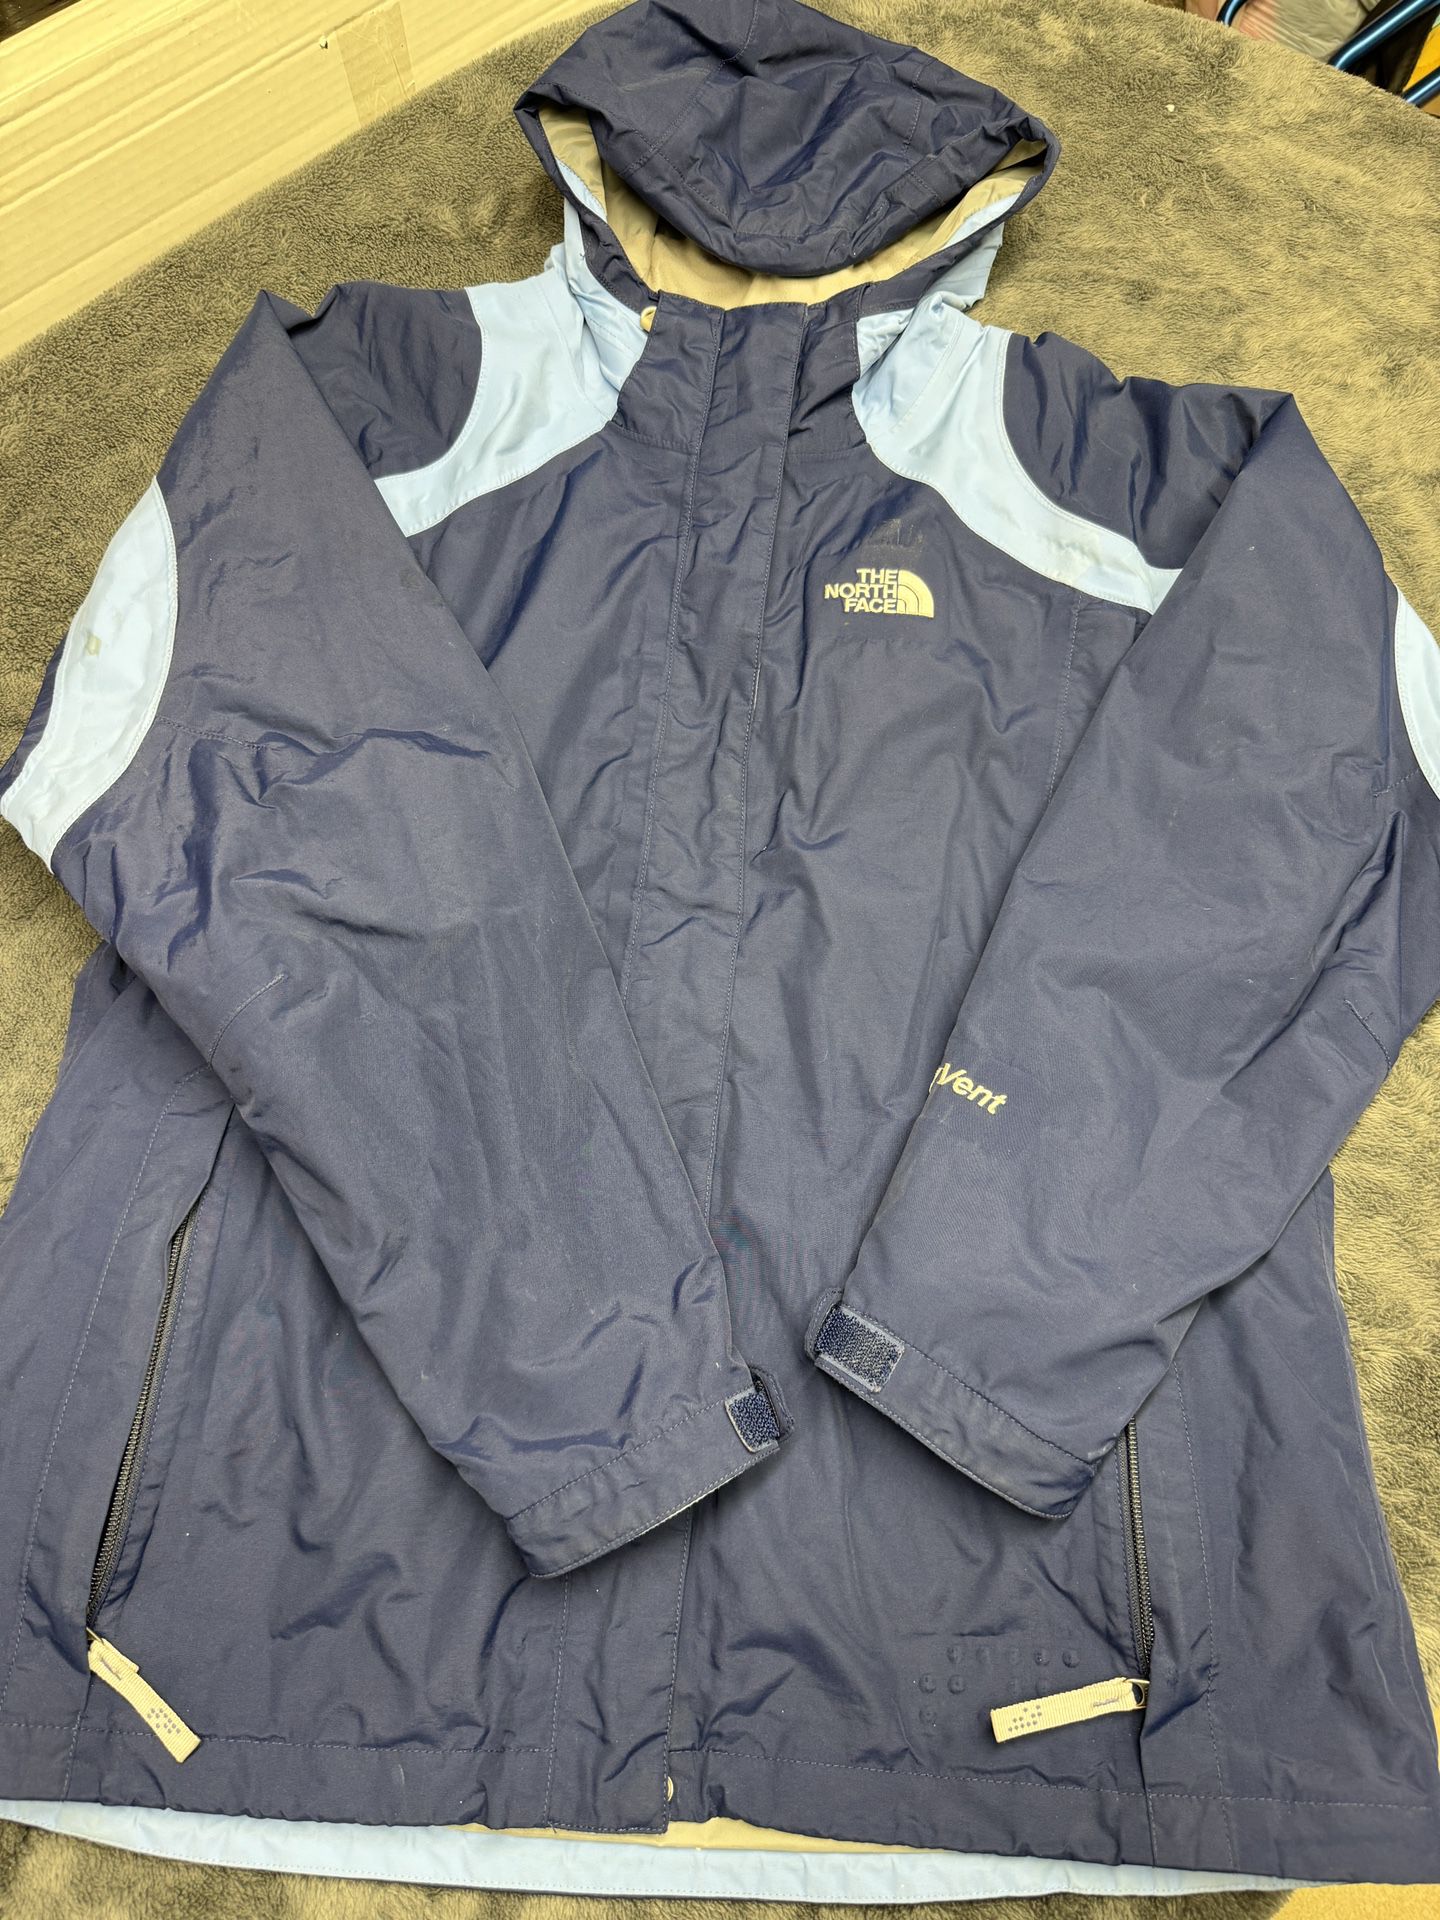 North Face HyVent Women’s Large, Medium-Weight Rain Jacket in good shape! Color is navy.  